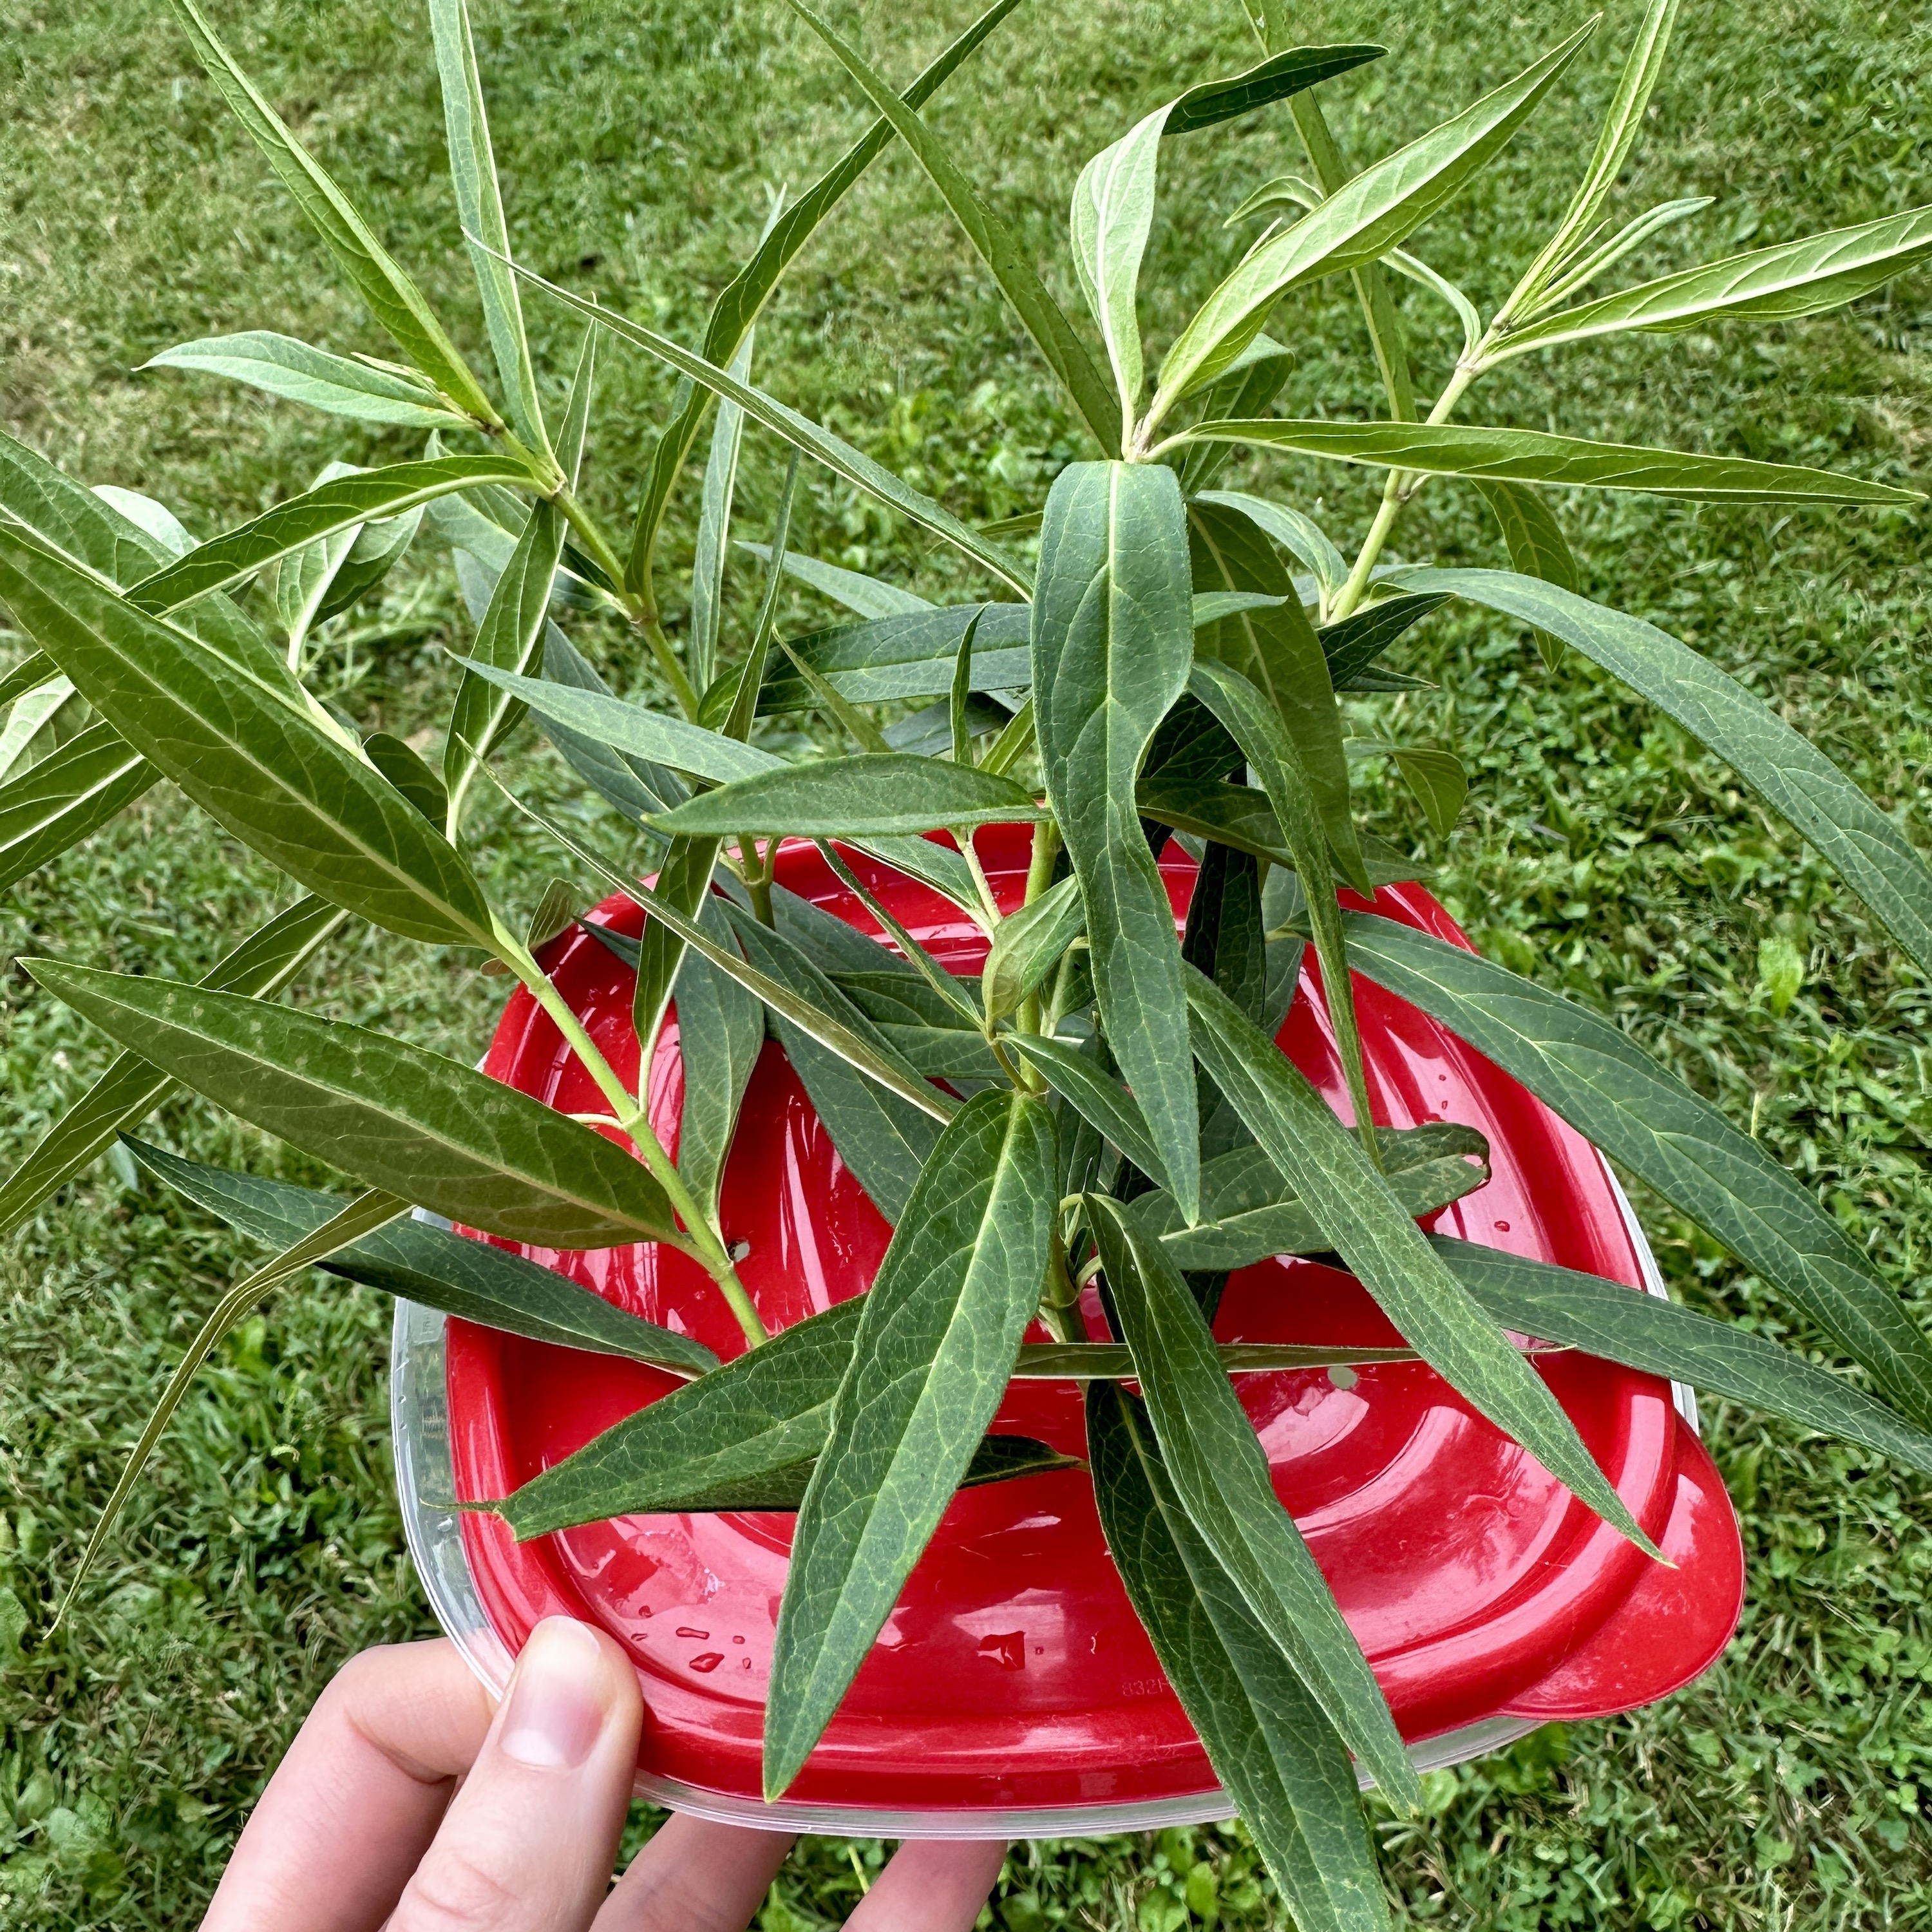 Plastic conatiner with holes for milkweed